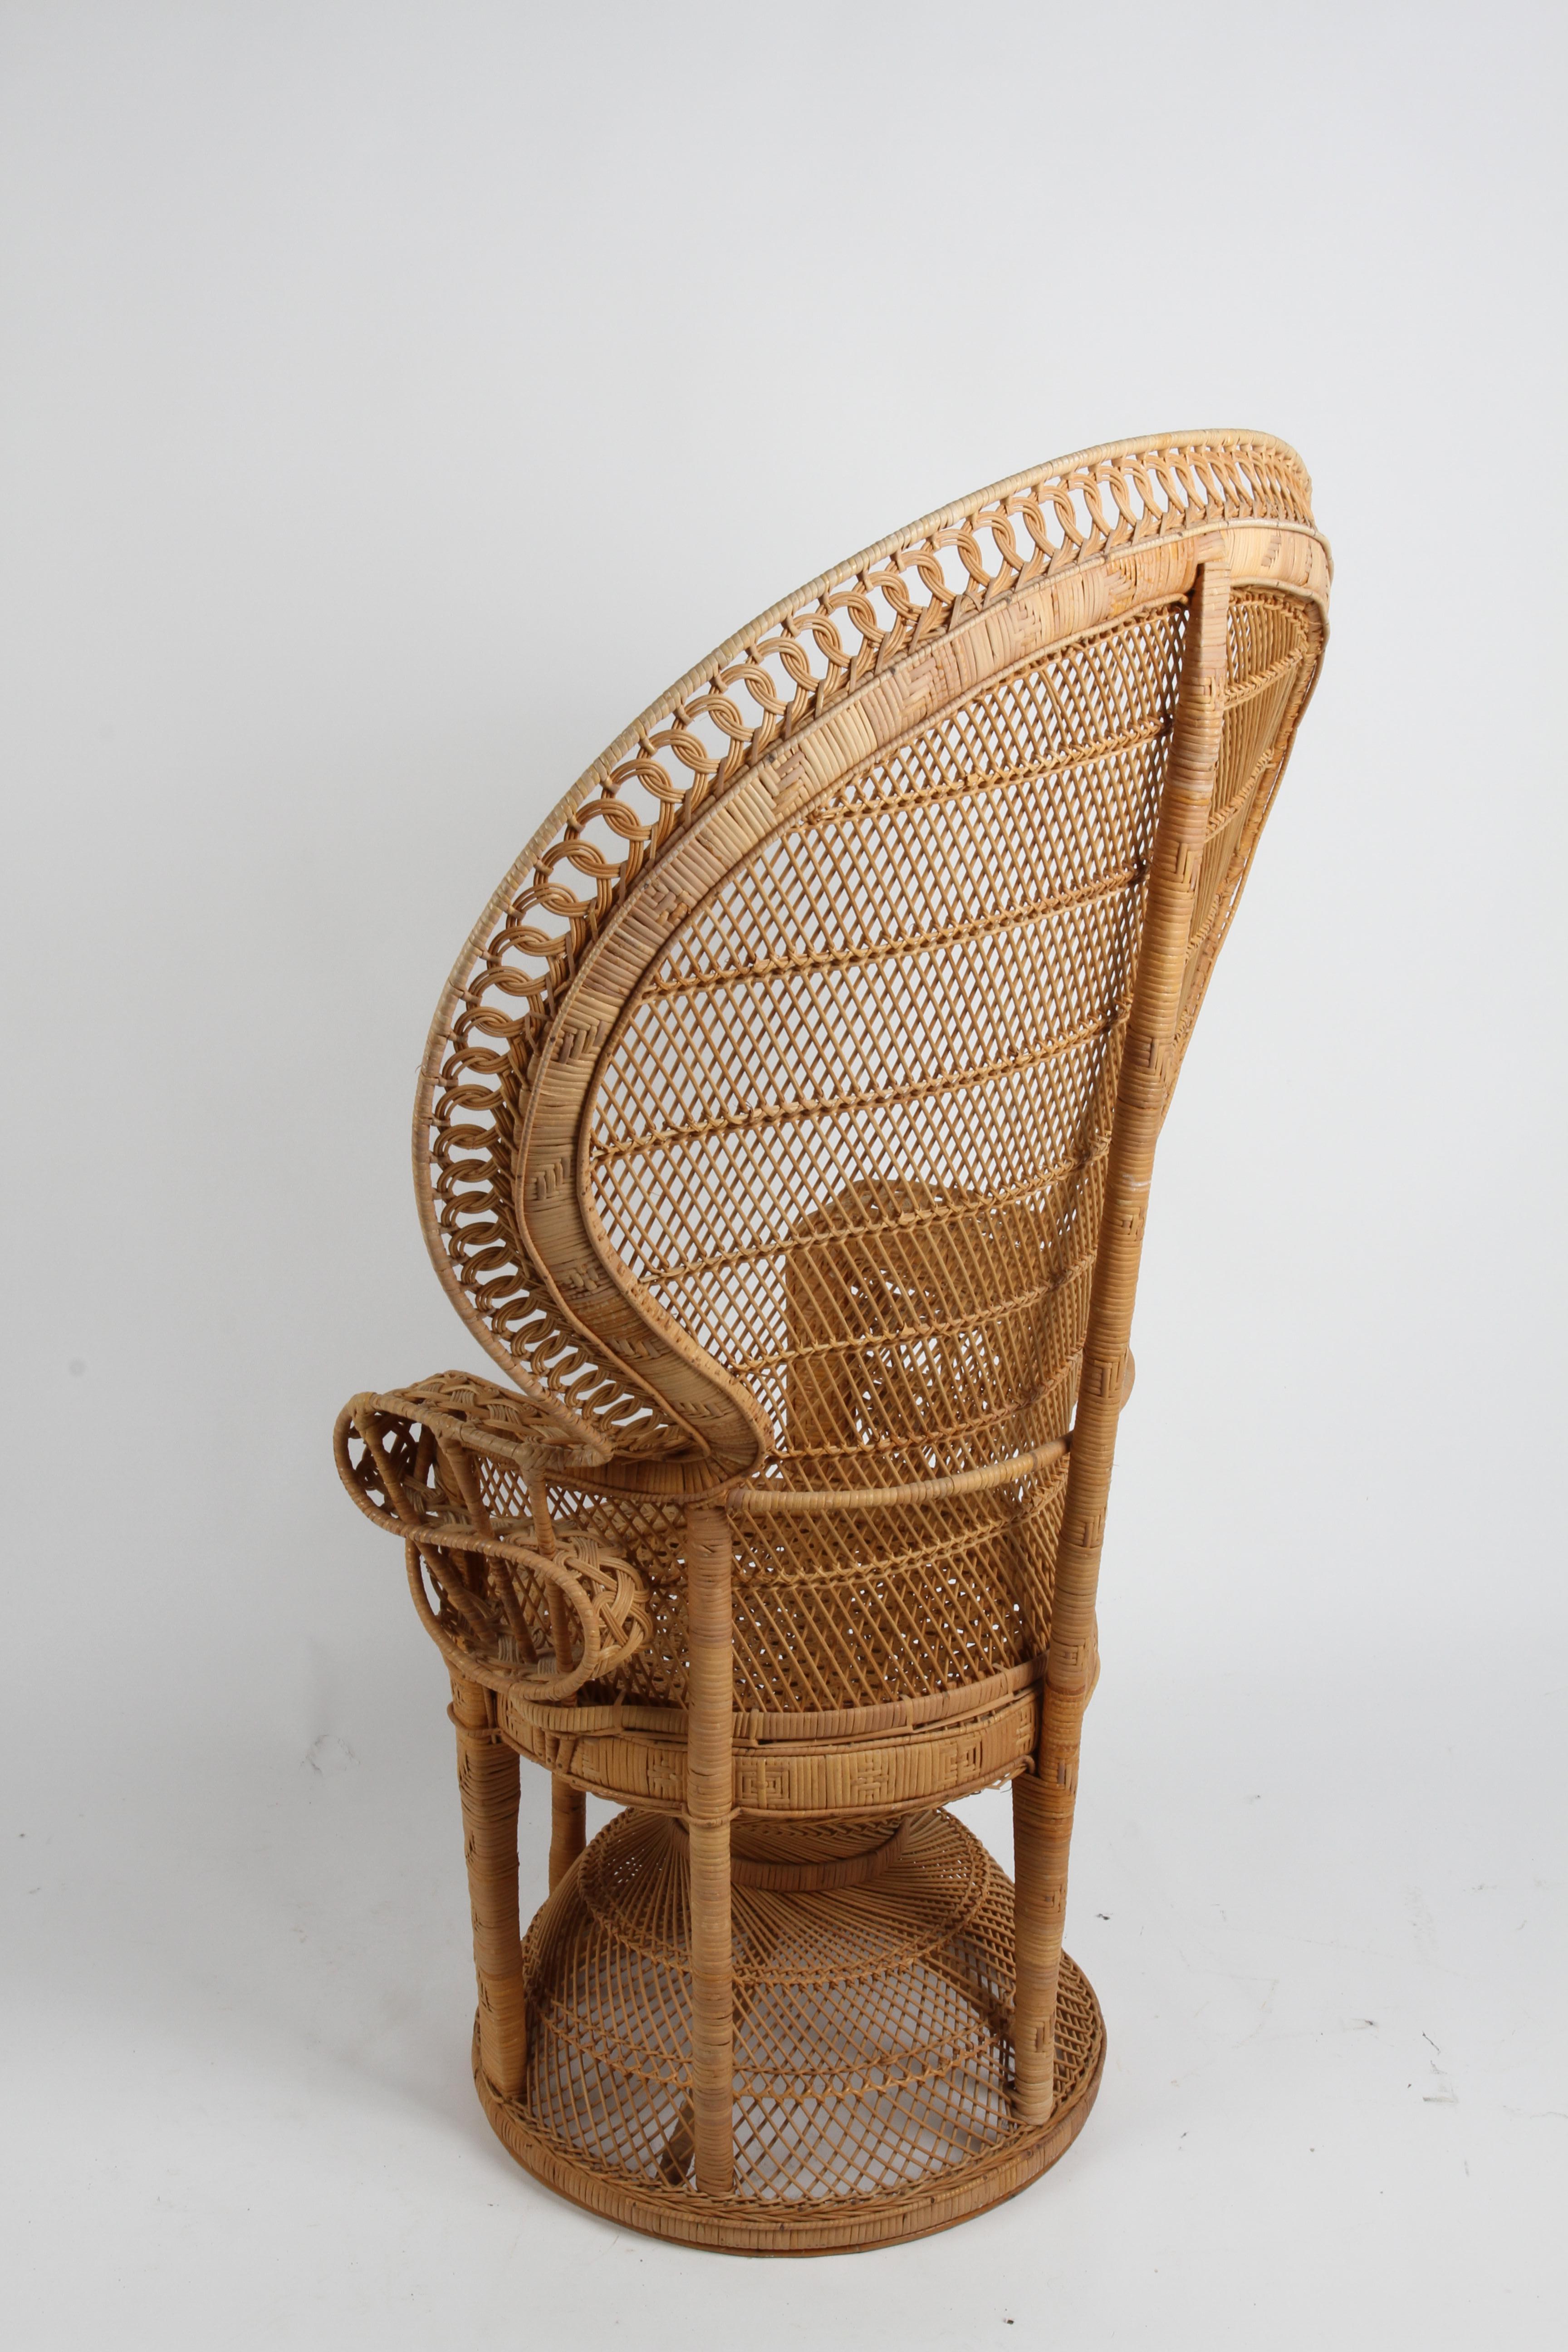 Vintage 1970s Rattan & Wicker Handcrafted Boho Chic Emmanuelle Peacock Chair For Sale 6